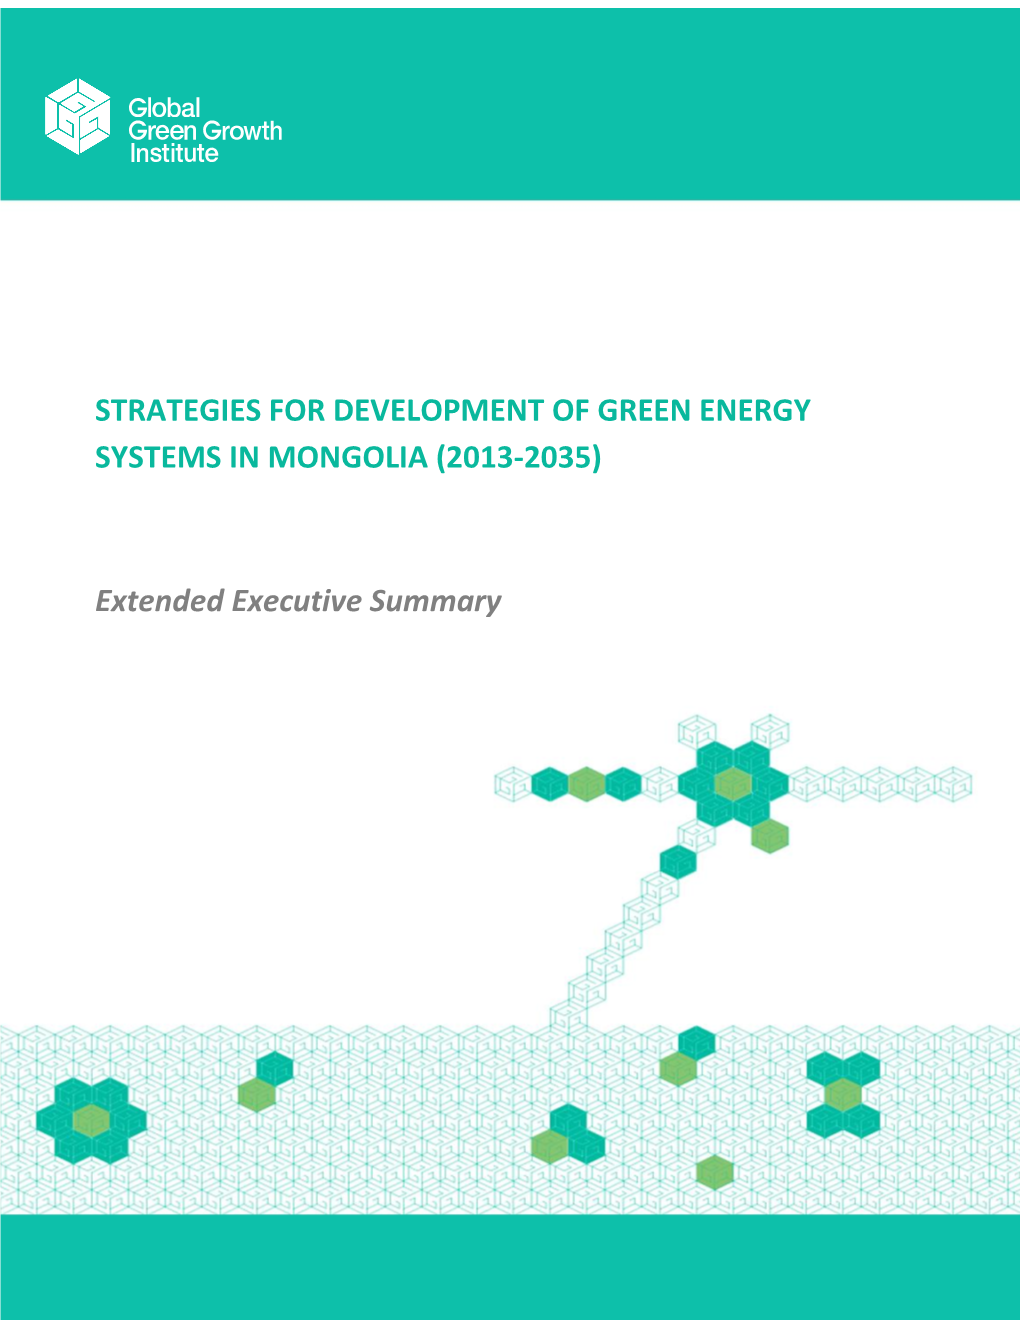 Strategies for Development of Green Energy Systems in Mongolia (2013-2035)